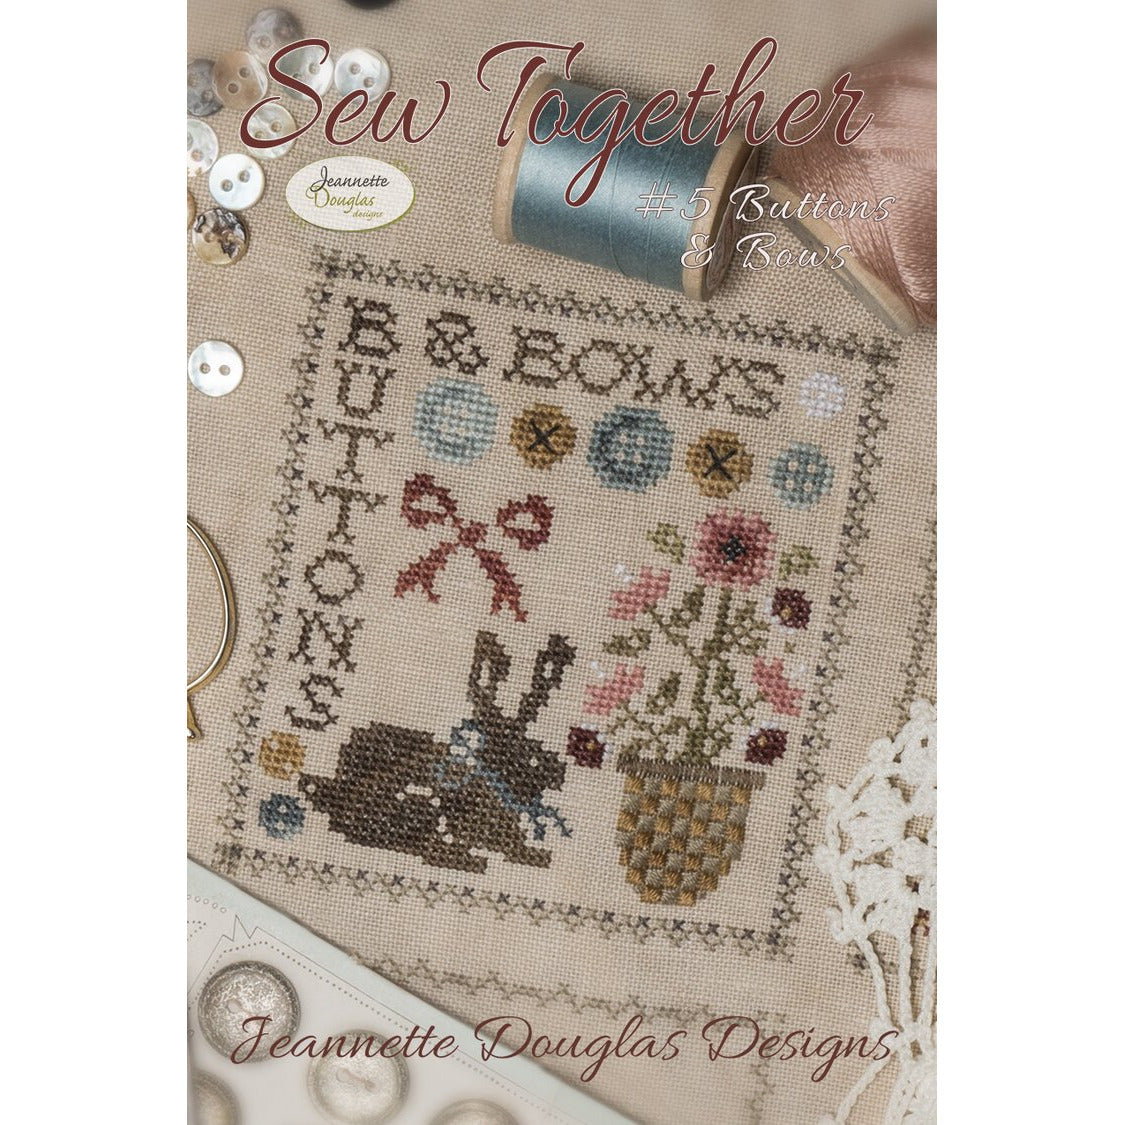 Jeannette Douglas Designs | Sew Together #5 Buttons & Bows Pattern